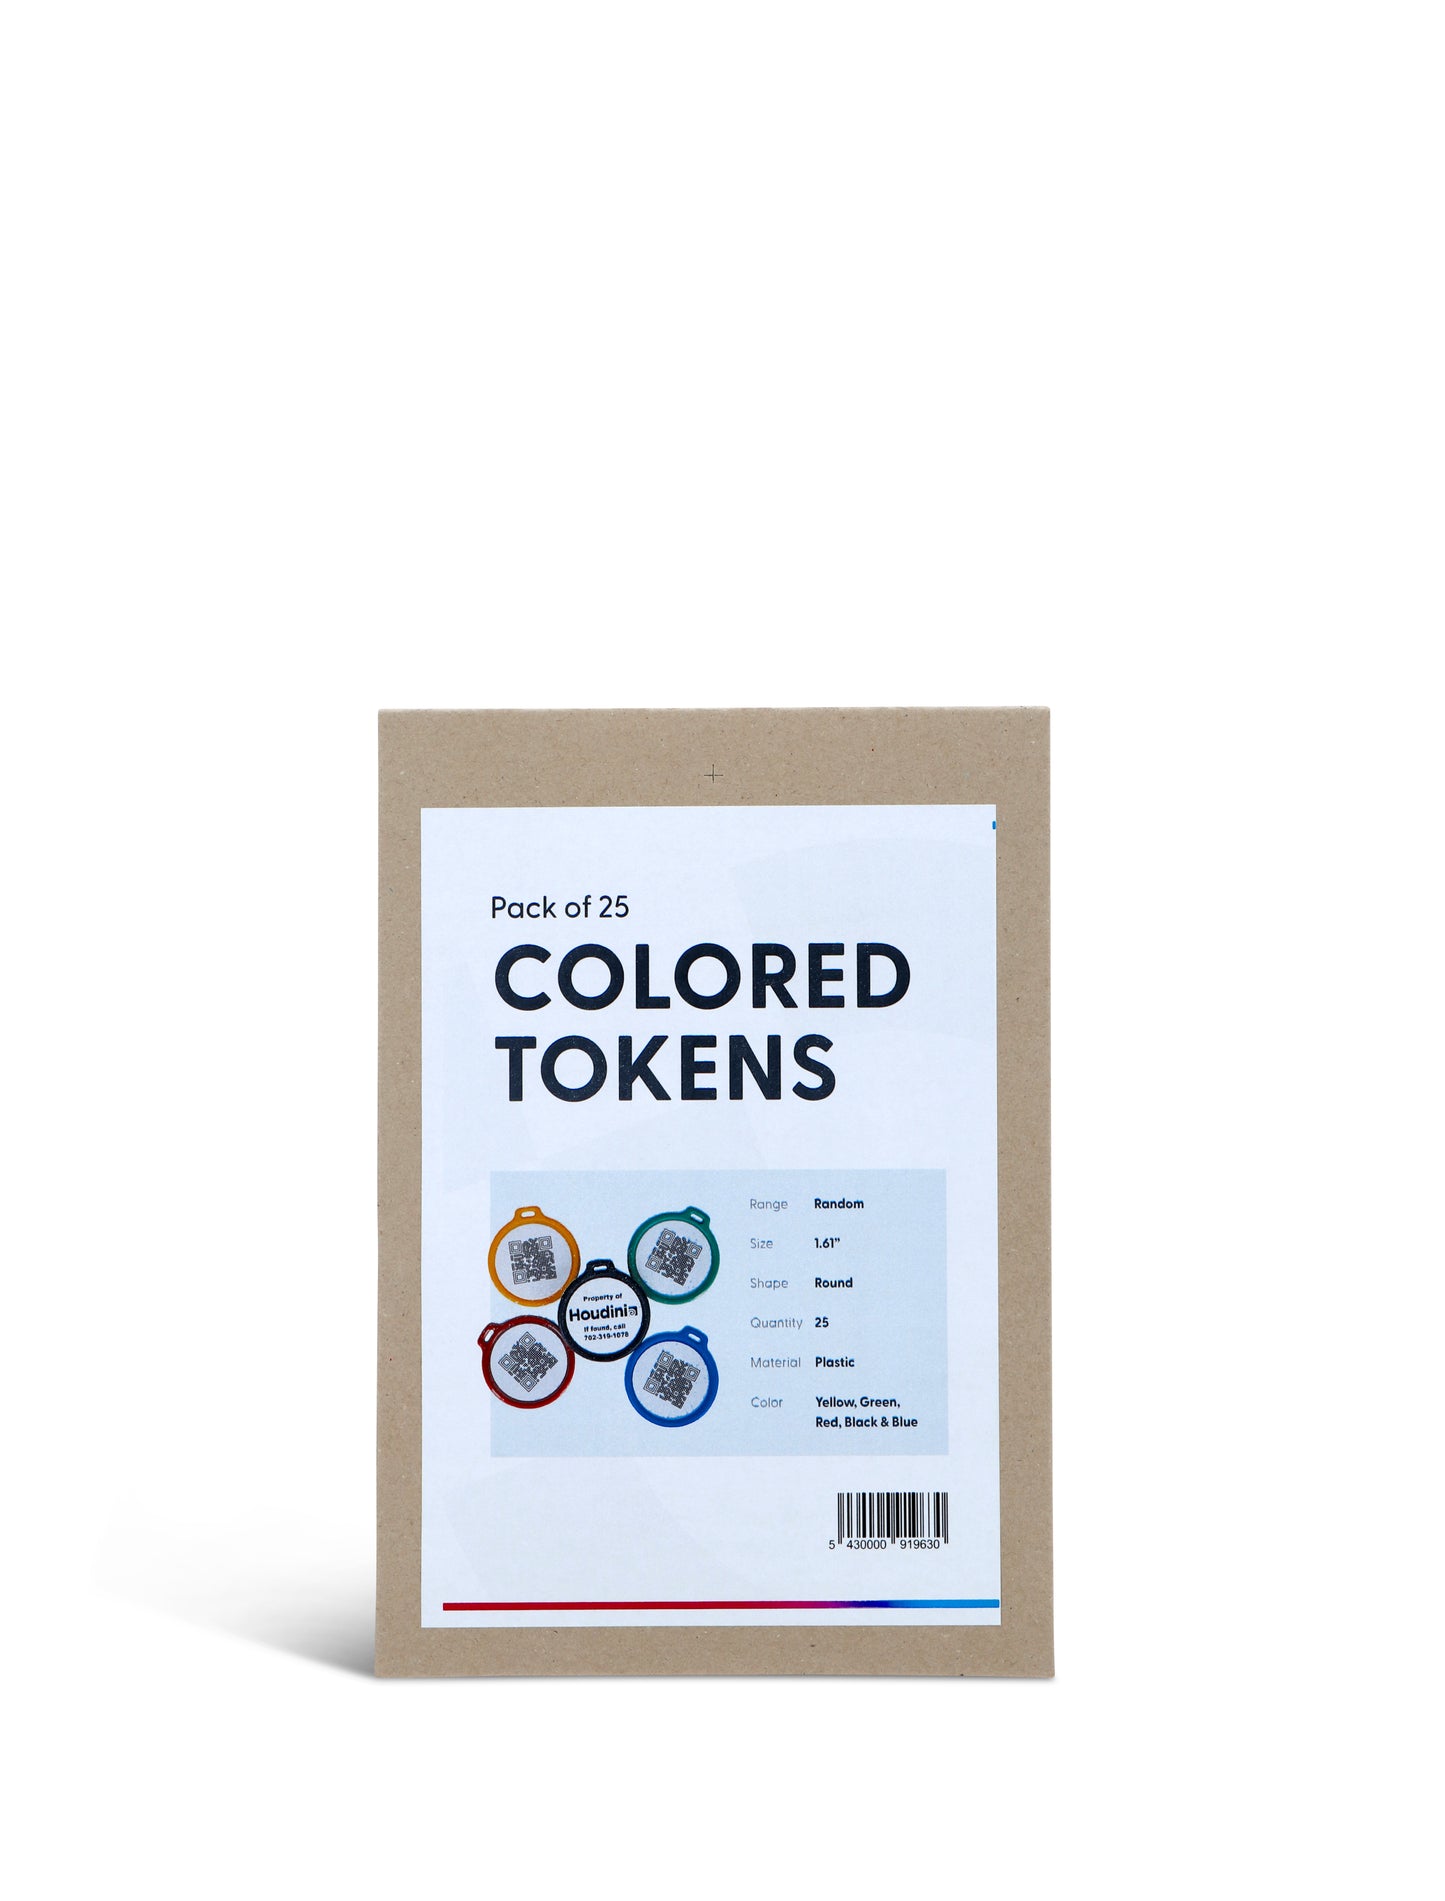 25 Colored Tokens - with zip ties